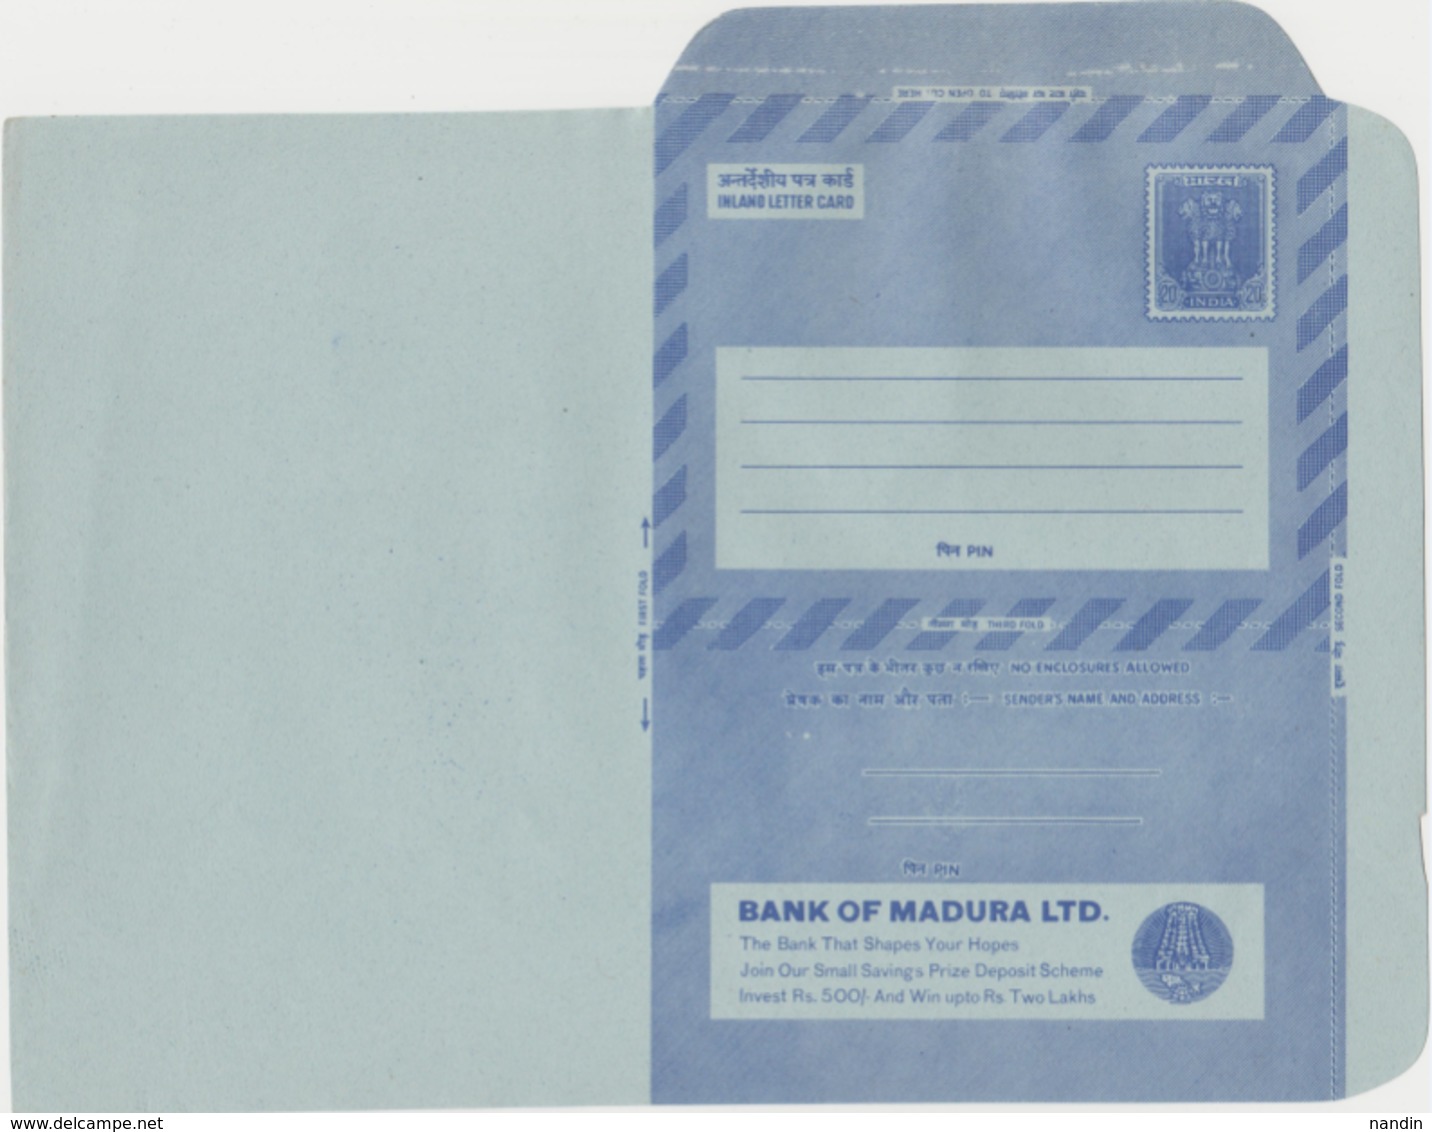 INDIA POSTAL STATIONERY INLAND LETTER CARD.20P  ADVERTISEMENT BANK OF MADURA - Inland Letter Cards